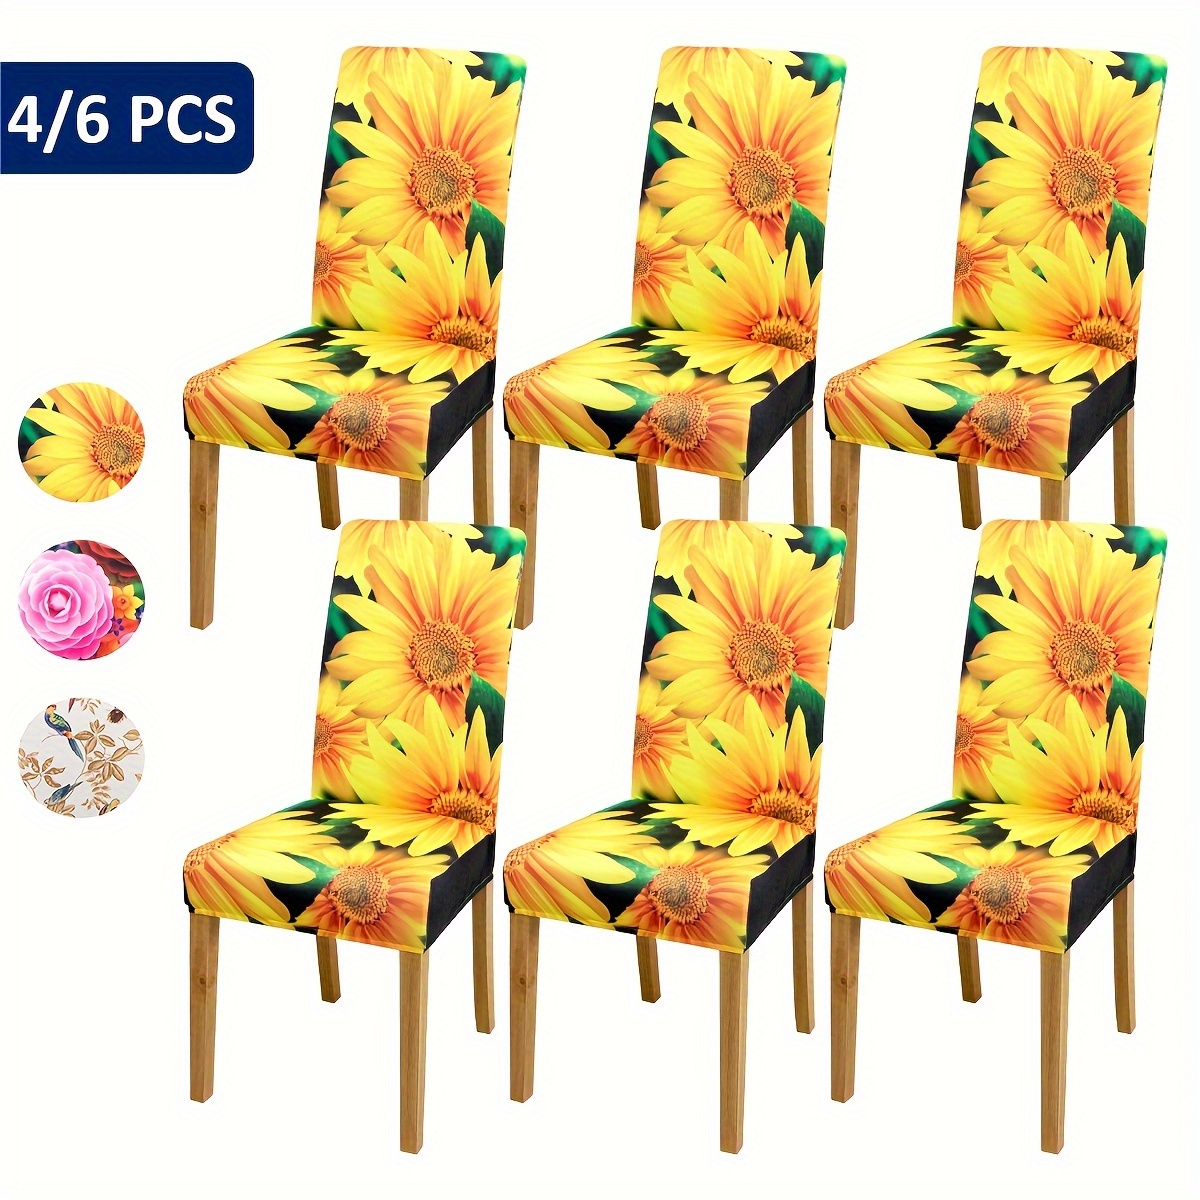 

4/6pcs Sunflower Pattern Chair Slipcovers, Dining Chair Cover, Furniture Protective Cover, For Dining Room Living Room Office Home Decor